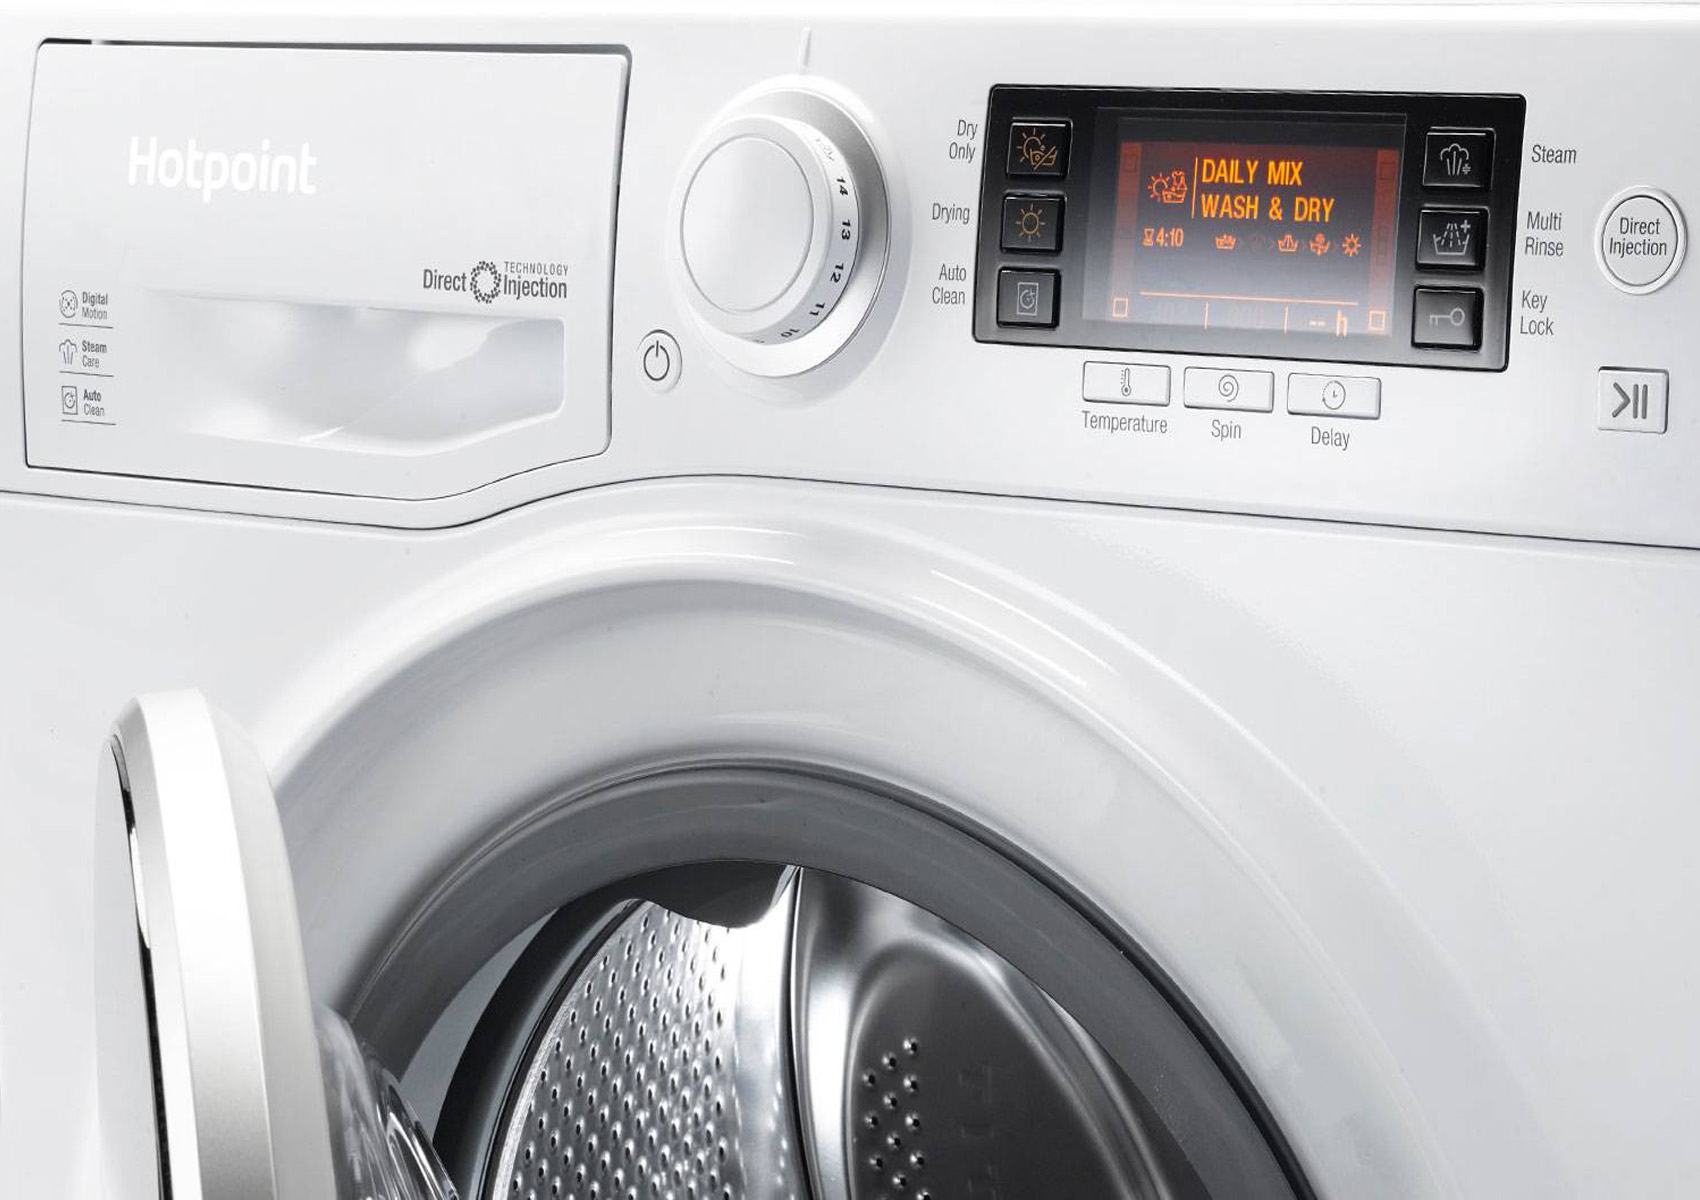 How To Reset A Hotpoint Washing Machine